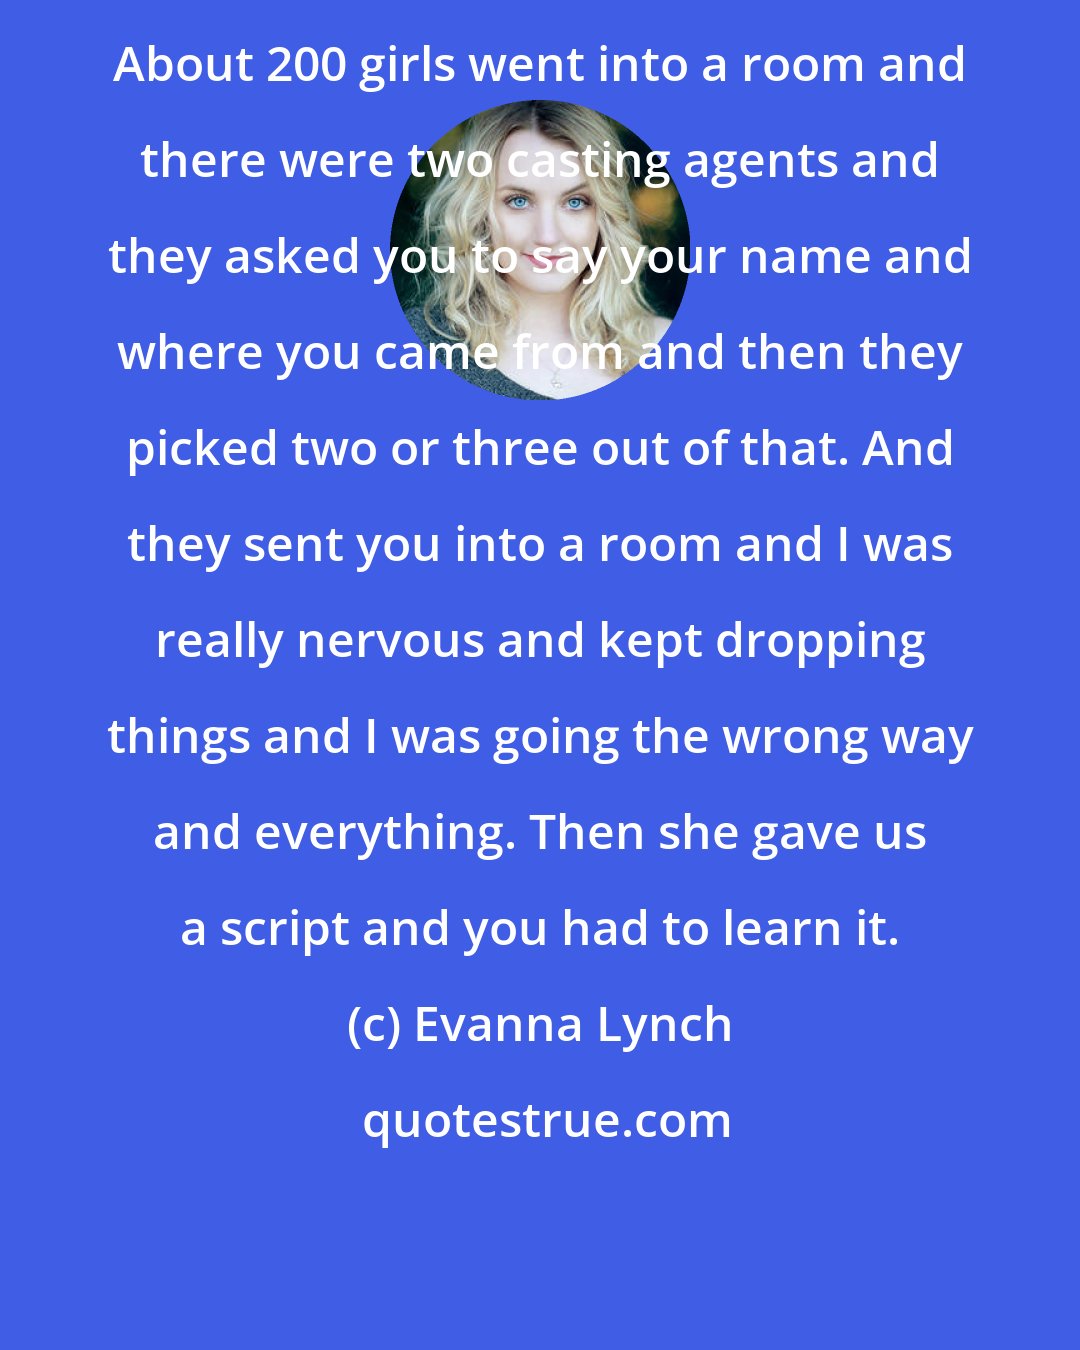 Evanna Lynch: About 200 girls went into a room and there were two casting agents and they asked you to say your name and where you came from and then they picked two or three out of that. And they sent you into a room and I was really nervous and kept dropping things and I was going the wrong way and everything. Then she gave us a script and you had to learn it.